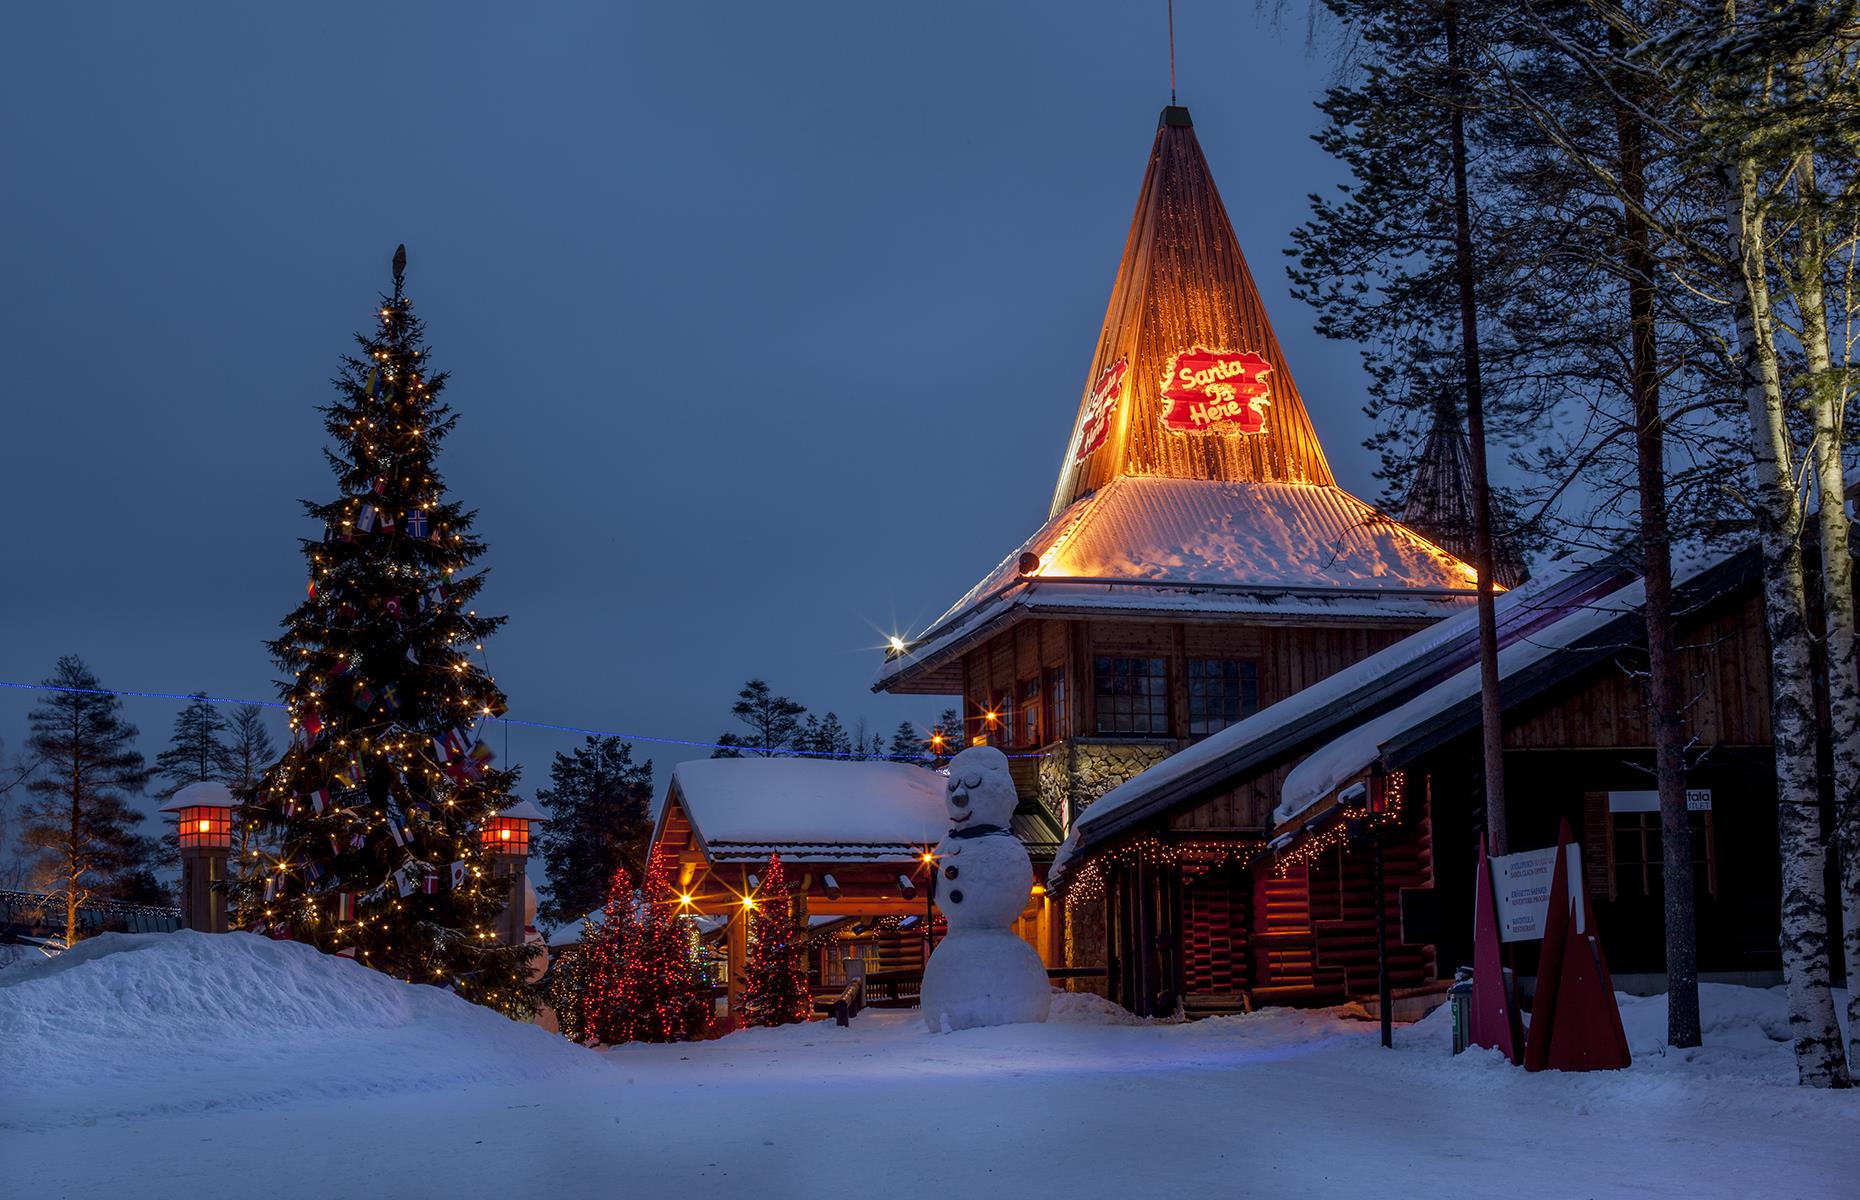 <p>Located in Rovaniemi in the Arctic Circle, the Santa Claus Village is the “official residence” of Santa and his helpers. Visit the post office and write your wishlist, or stop by the Santa Claus office to meet the mythical man himself. With its Christmassy shops, snow hotel and a year-round festive atmosphere, even adults will believe in the magic.</p>  <p><strong><a href="https://www.loveexploring.com/galleries/117580/frozen-in-time-the-arctic-circles-creepiest-town">This is the fascinating story of Pyramiden, the Arctic Circle's creepiest ghost town</a></strong></p>